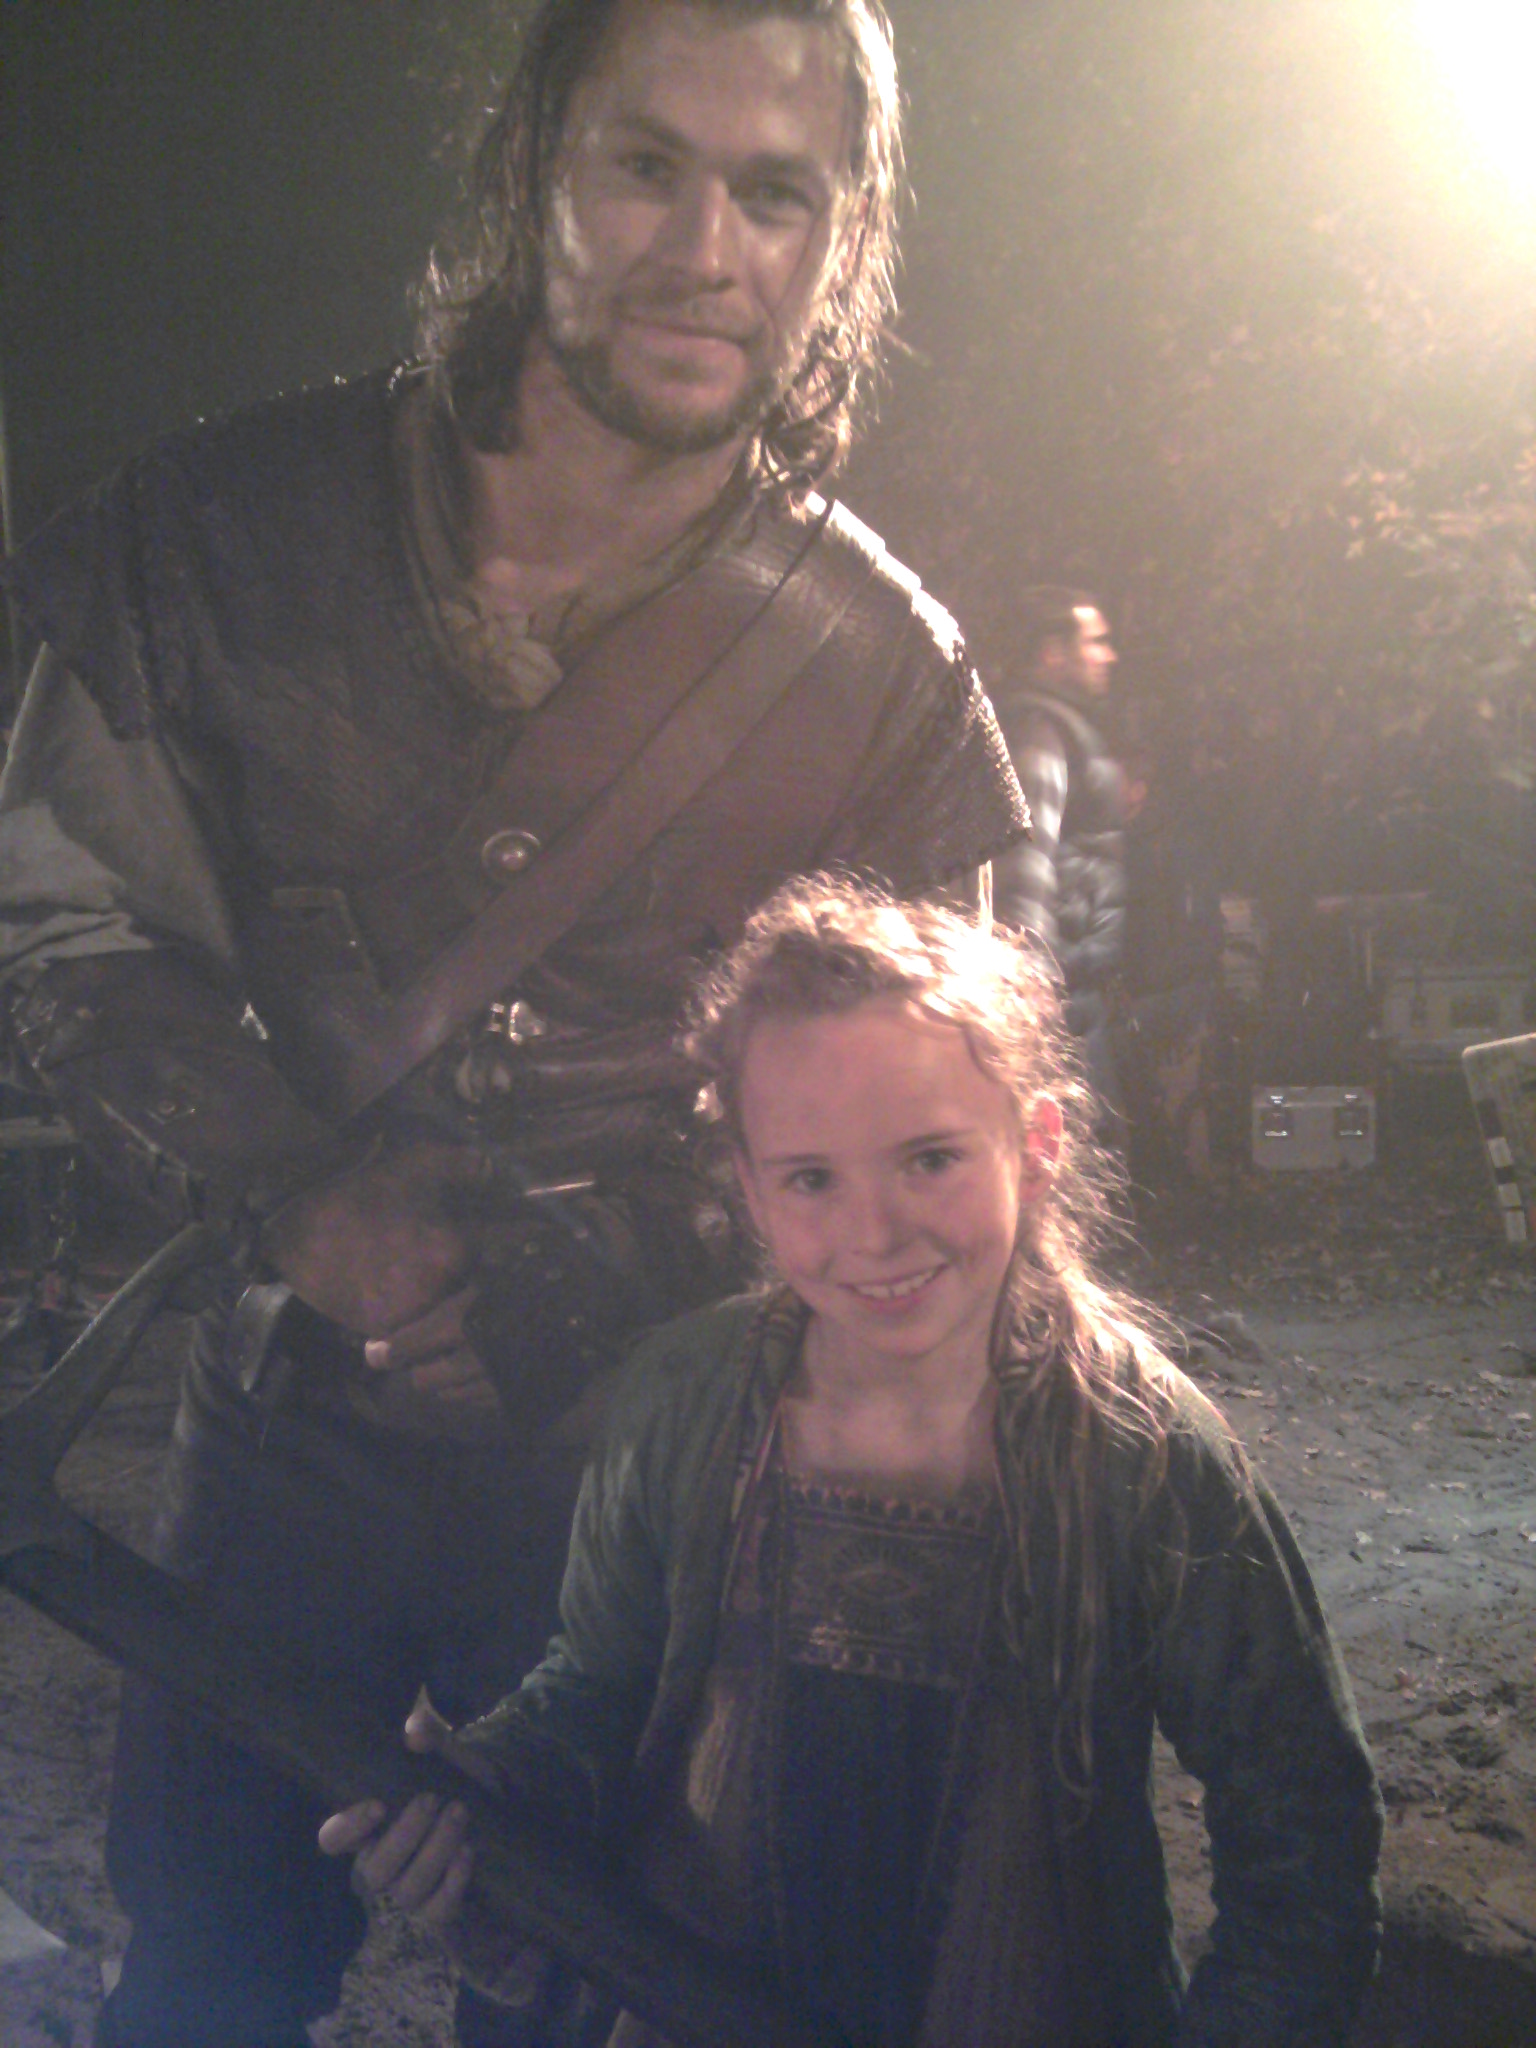 As Lily with Chris Hemsworth in Snow White and the Huntsman